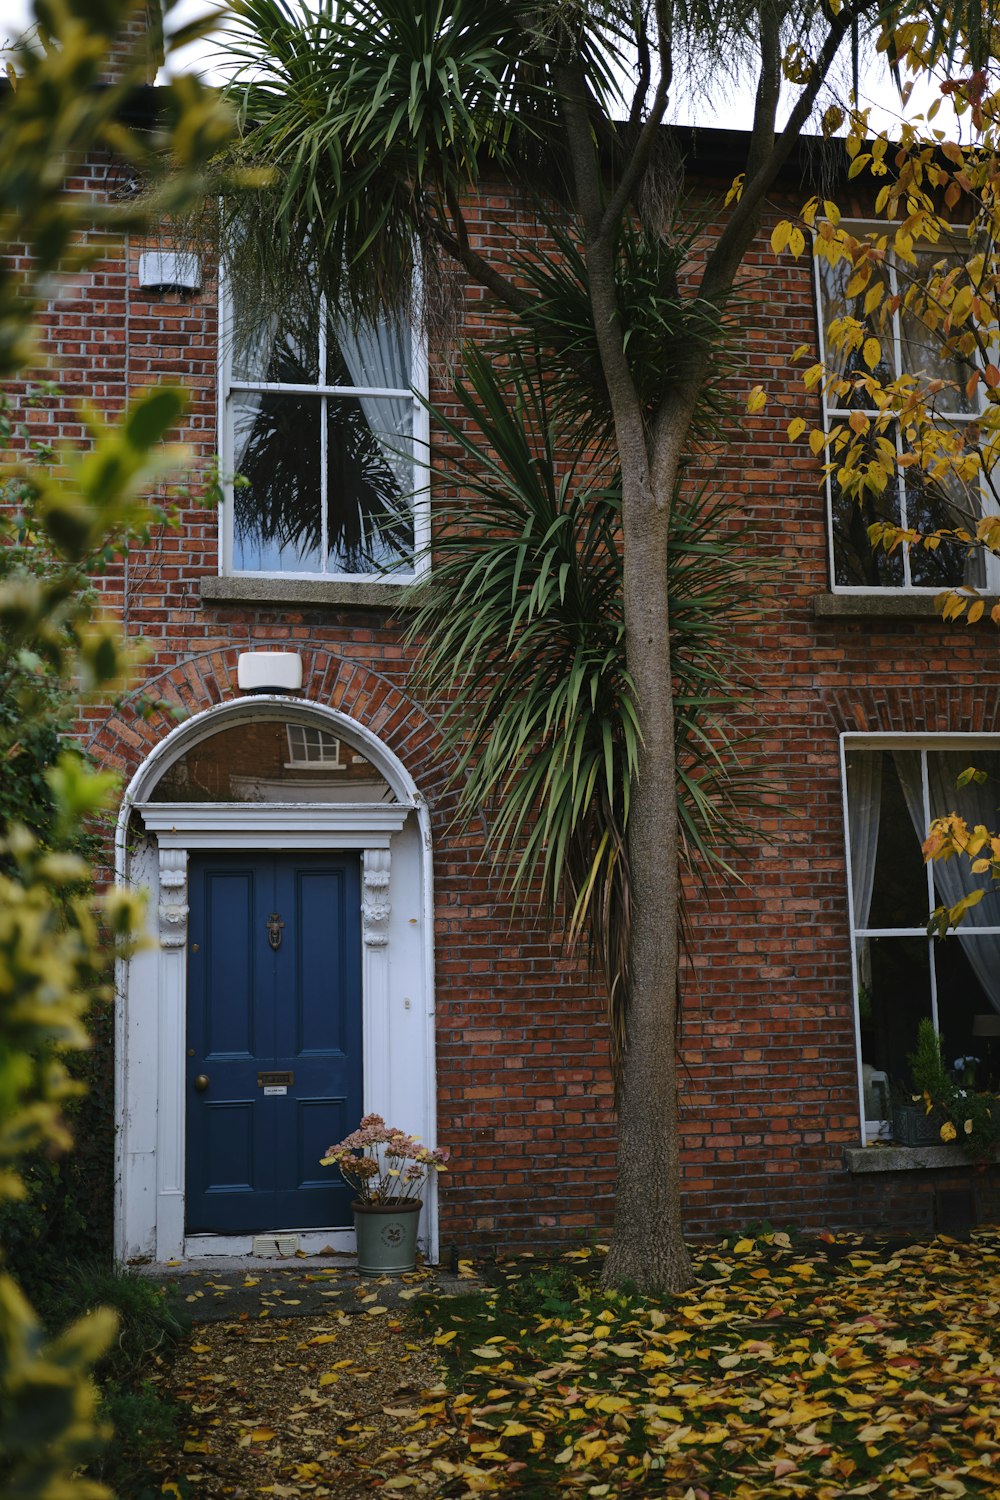 a brick building with a blue door and window